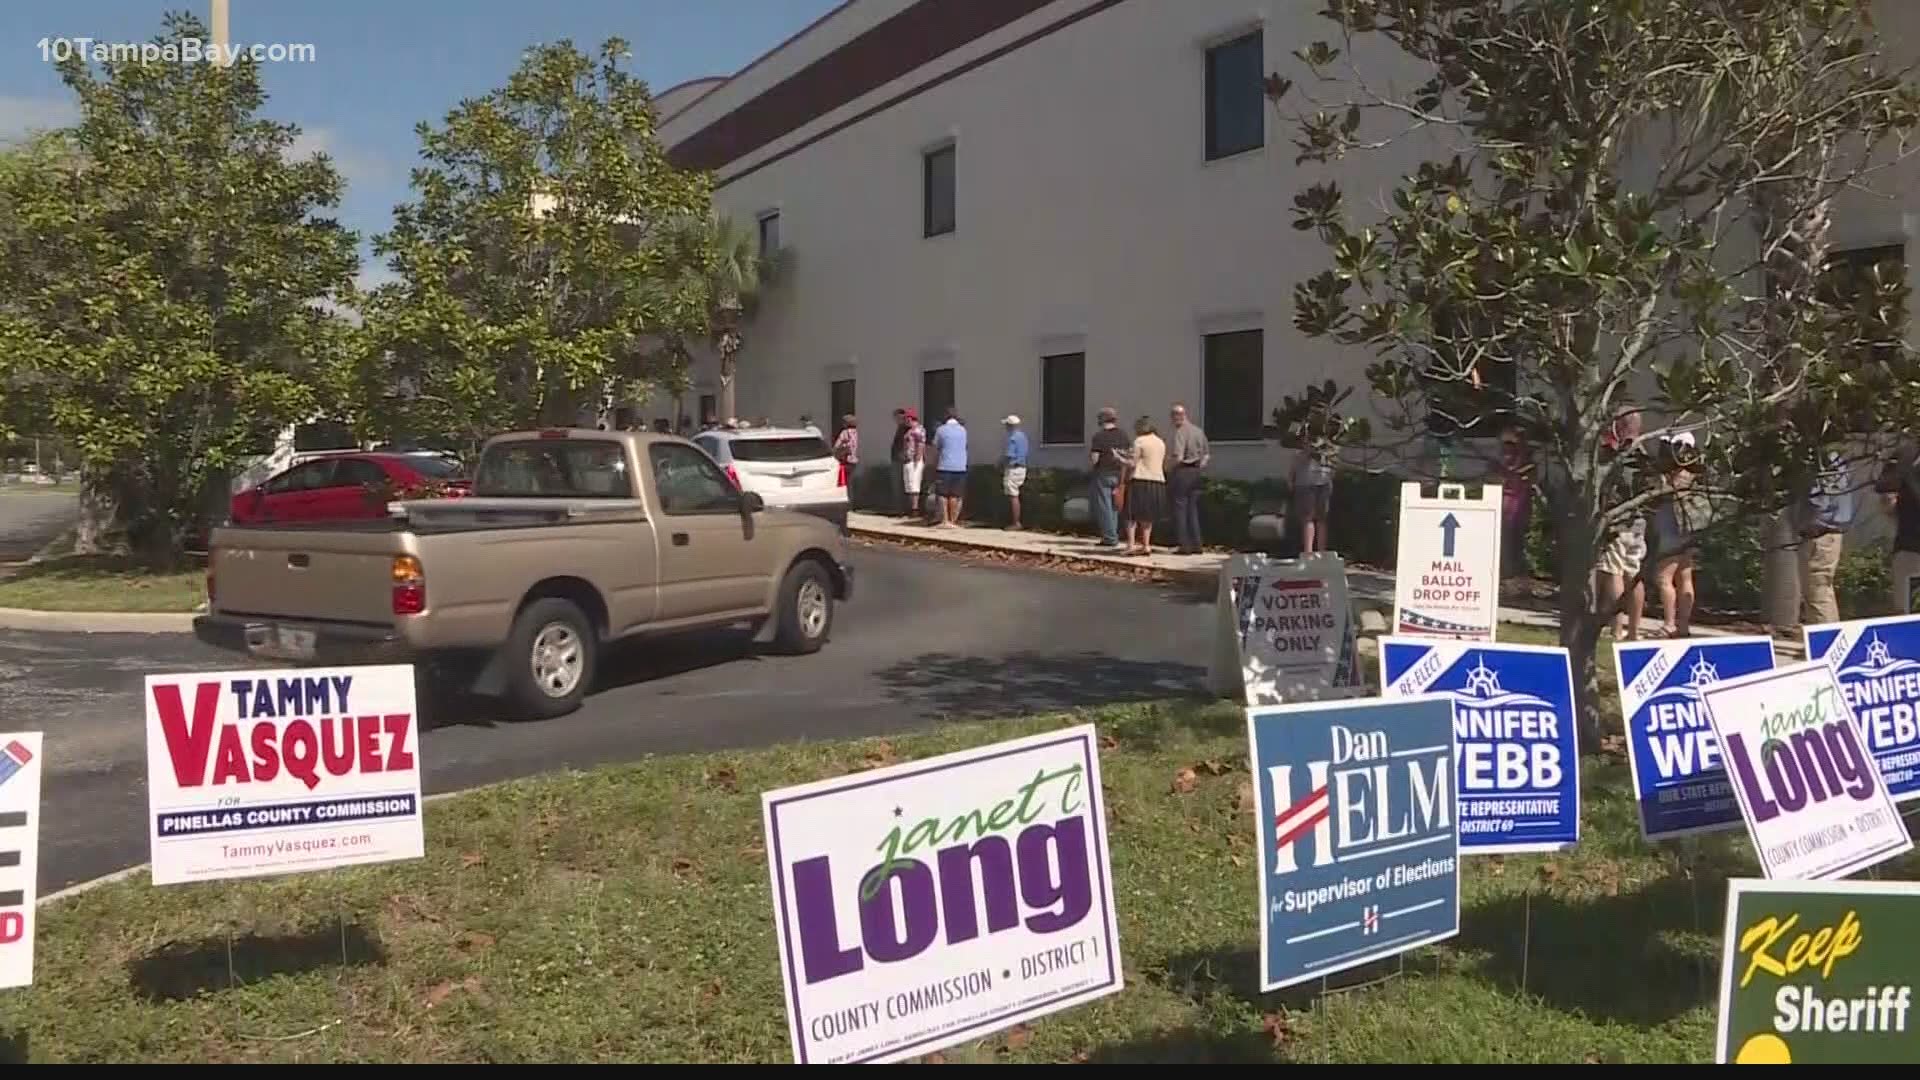 Some Tampa Bay Supervisor of Elections websites show the average wait time at polling places.